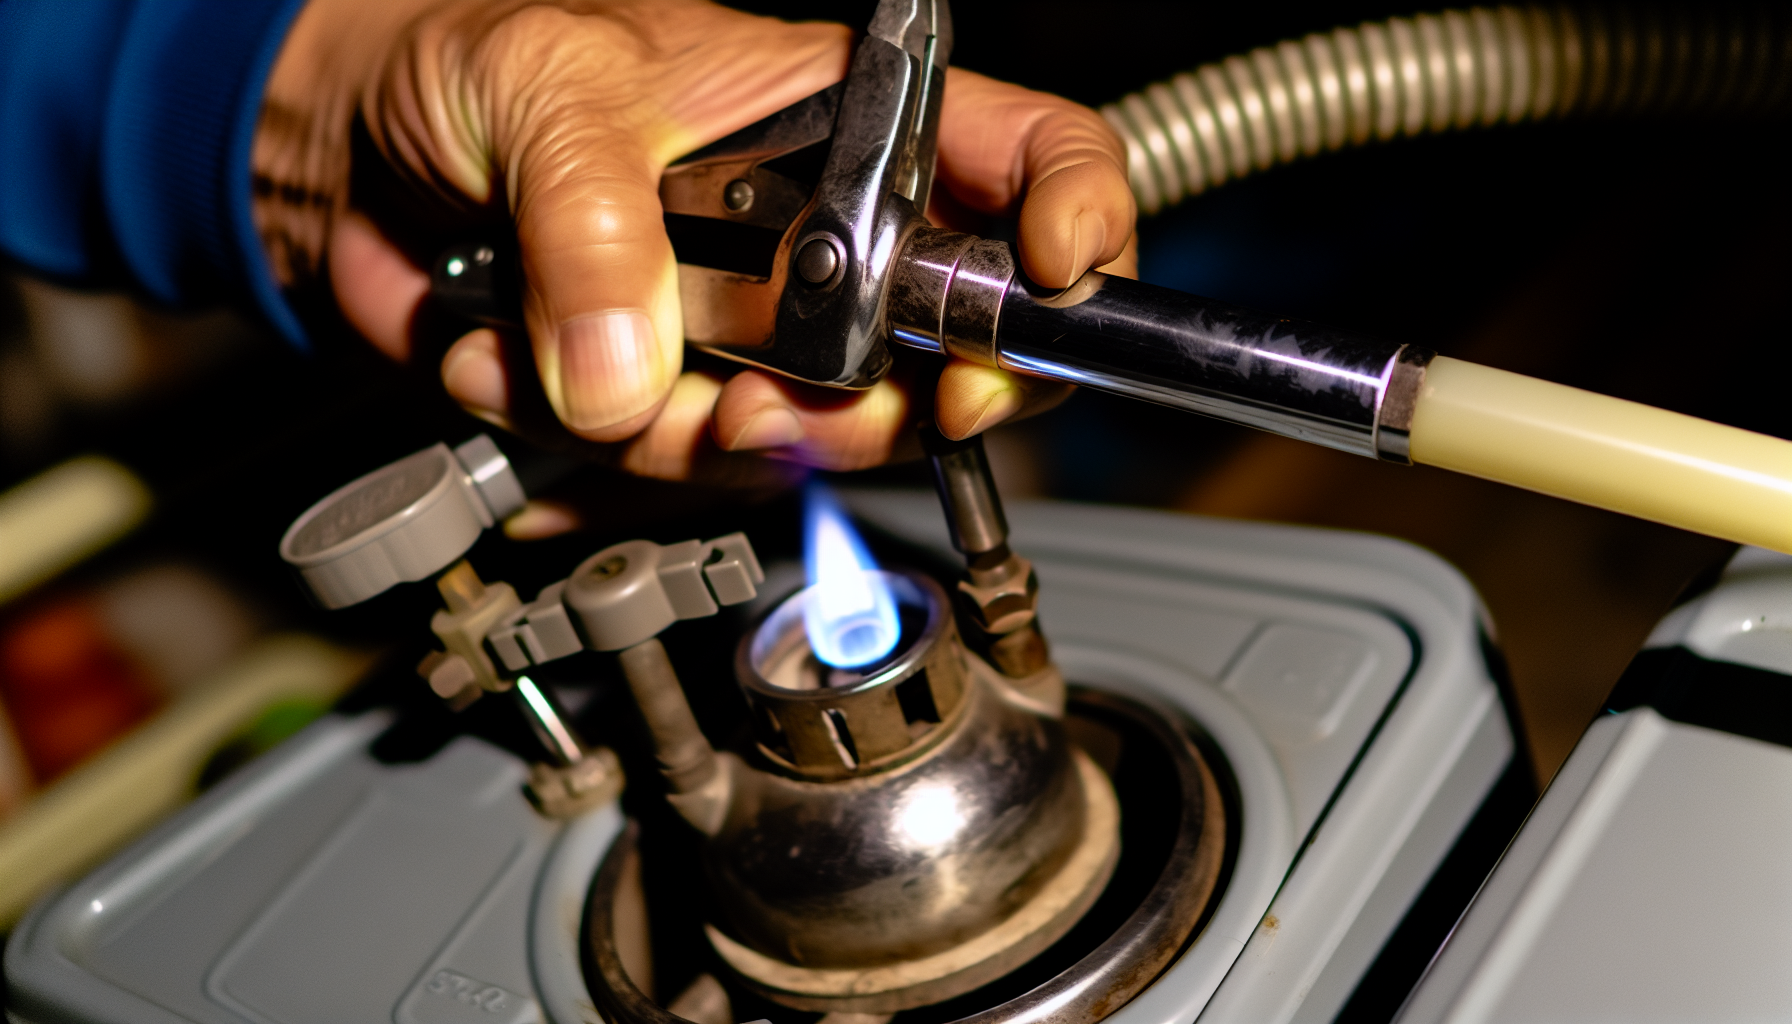 Relighting the pilot light in a gas hot water system